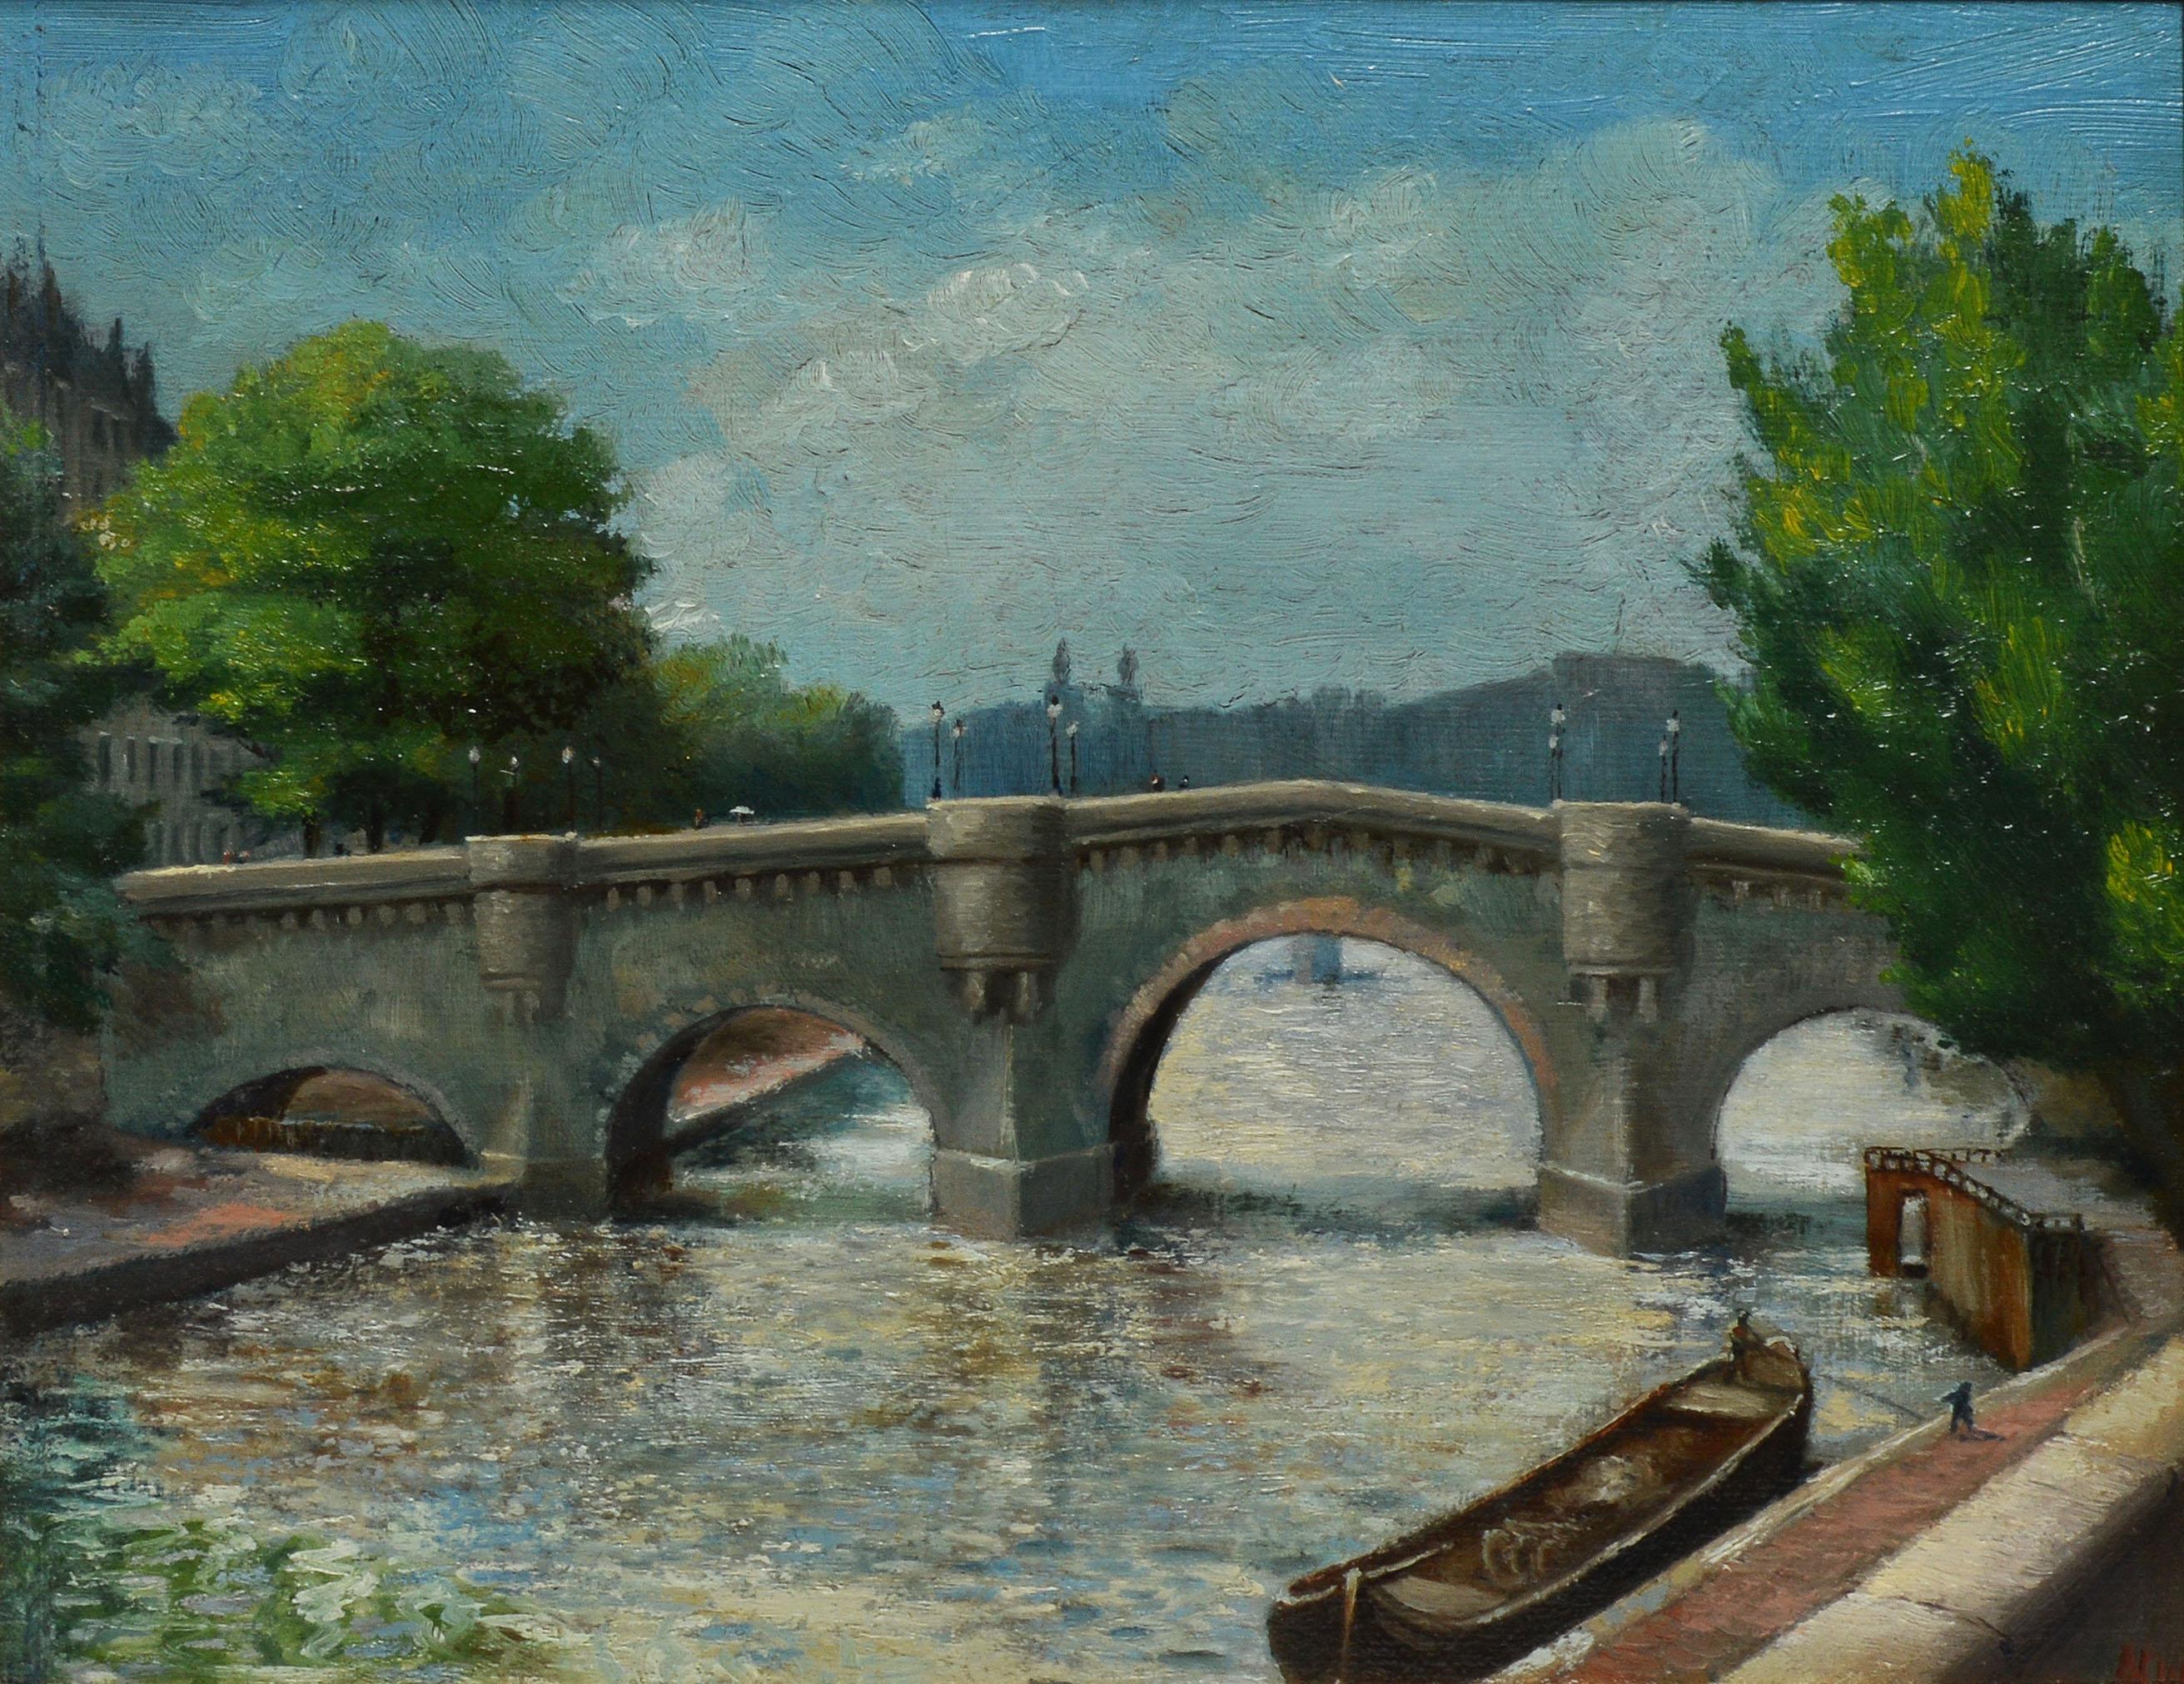 Antique Paris school oil painting of the Seine River.  Oil on board, circa 1900.  Signed lower right.  Displayed in a period modernist frame.  Image size, 12